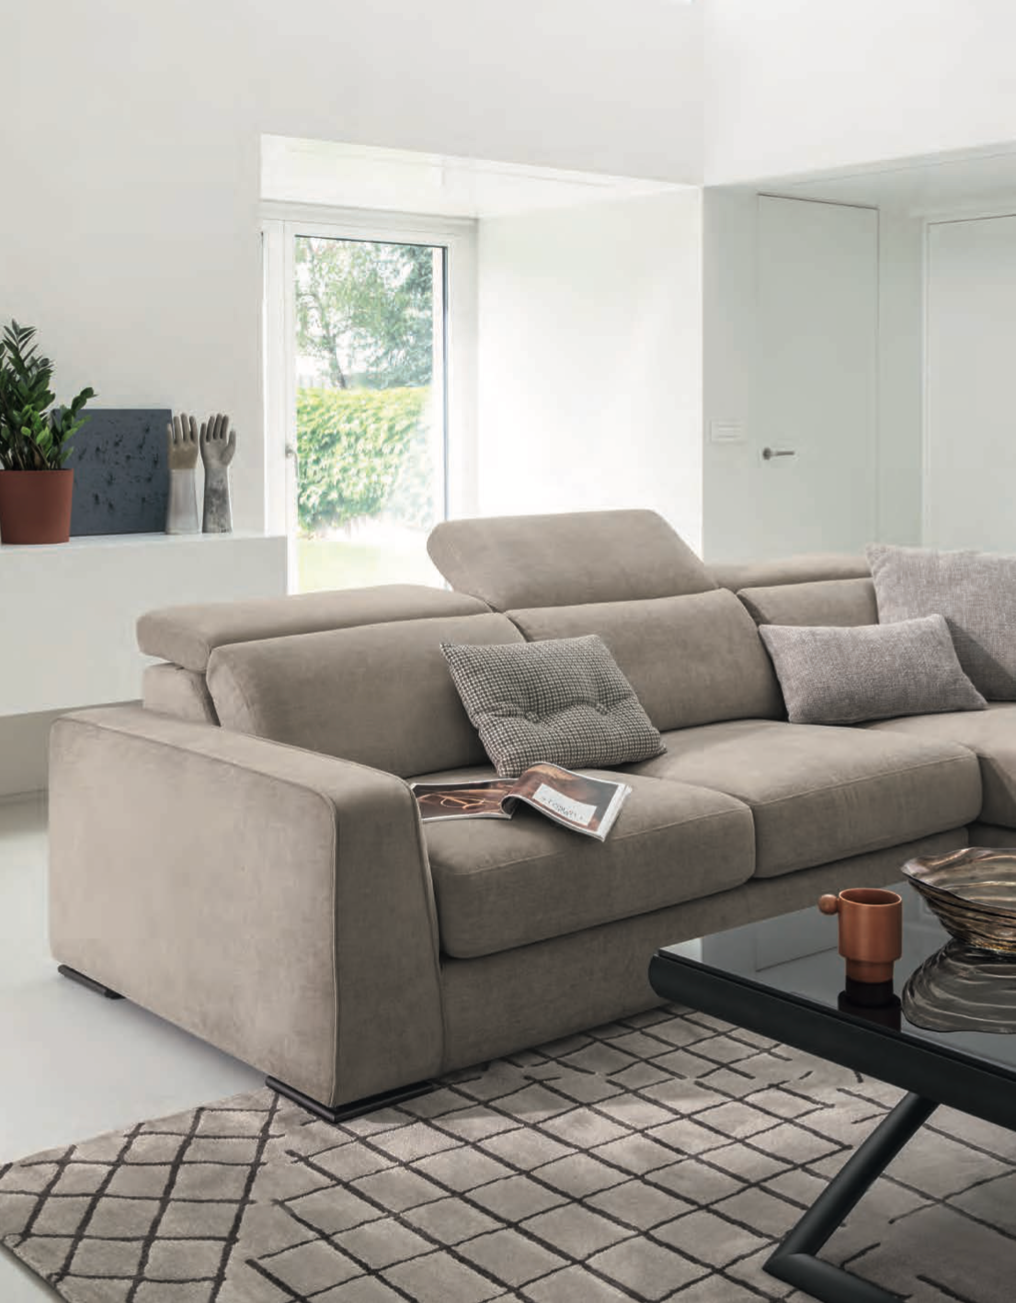 How to Find the Best Sofa Online - The Long and the Short Of It